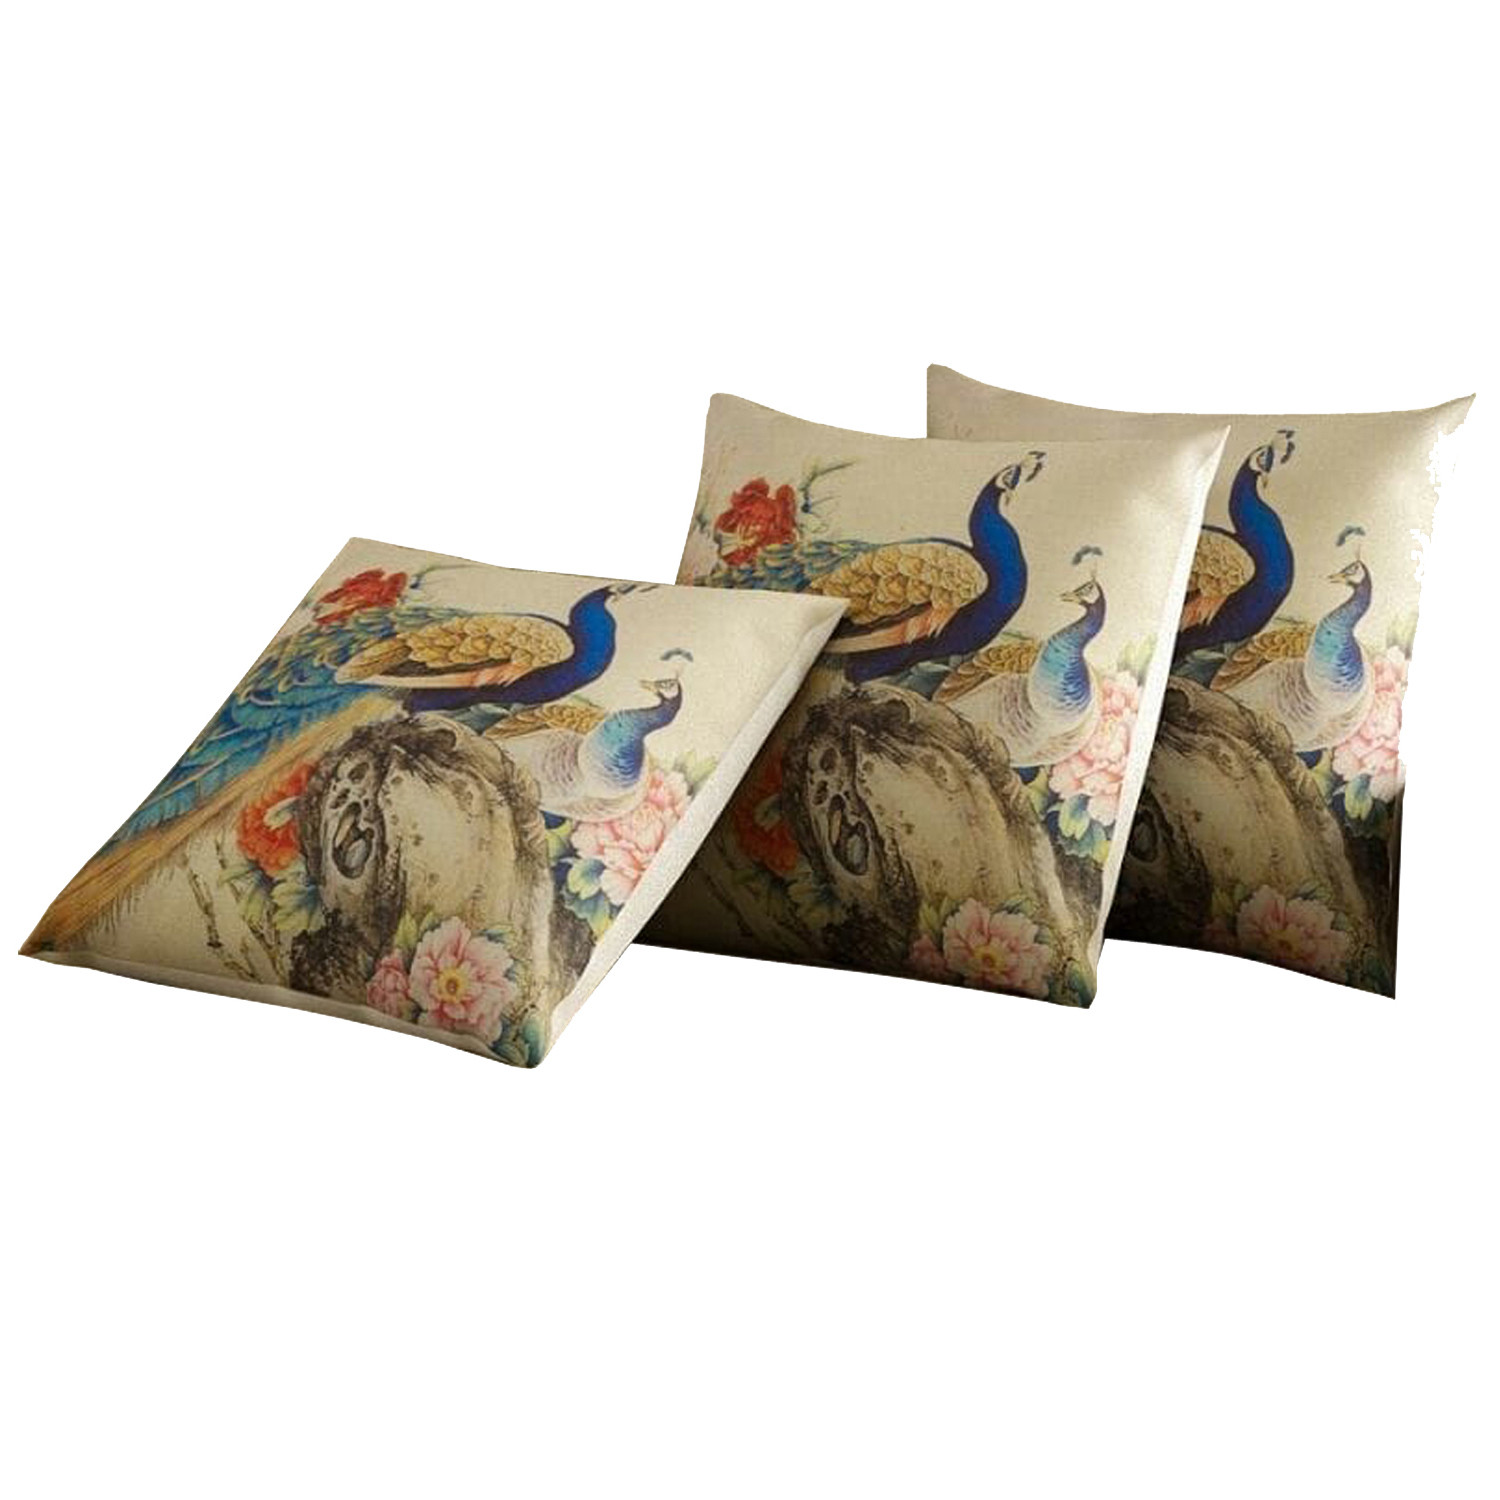 Kuber Industries Peacock Print Cushion Cover|Ractangle Cushion Covers|Sofa Cushion Covers|Cushion Covers 16 inch x 16 inch|Cushion Cover Set of 5 (Multicolor)